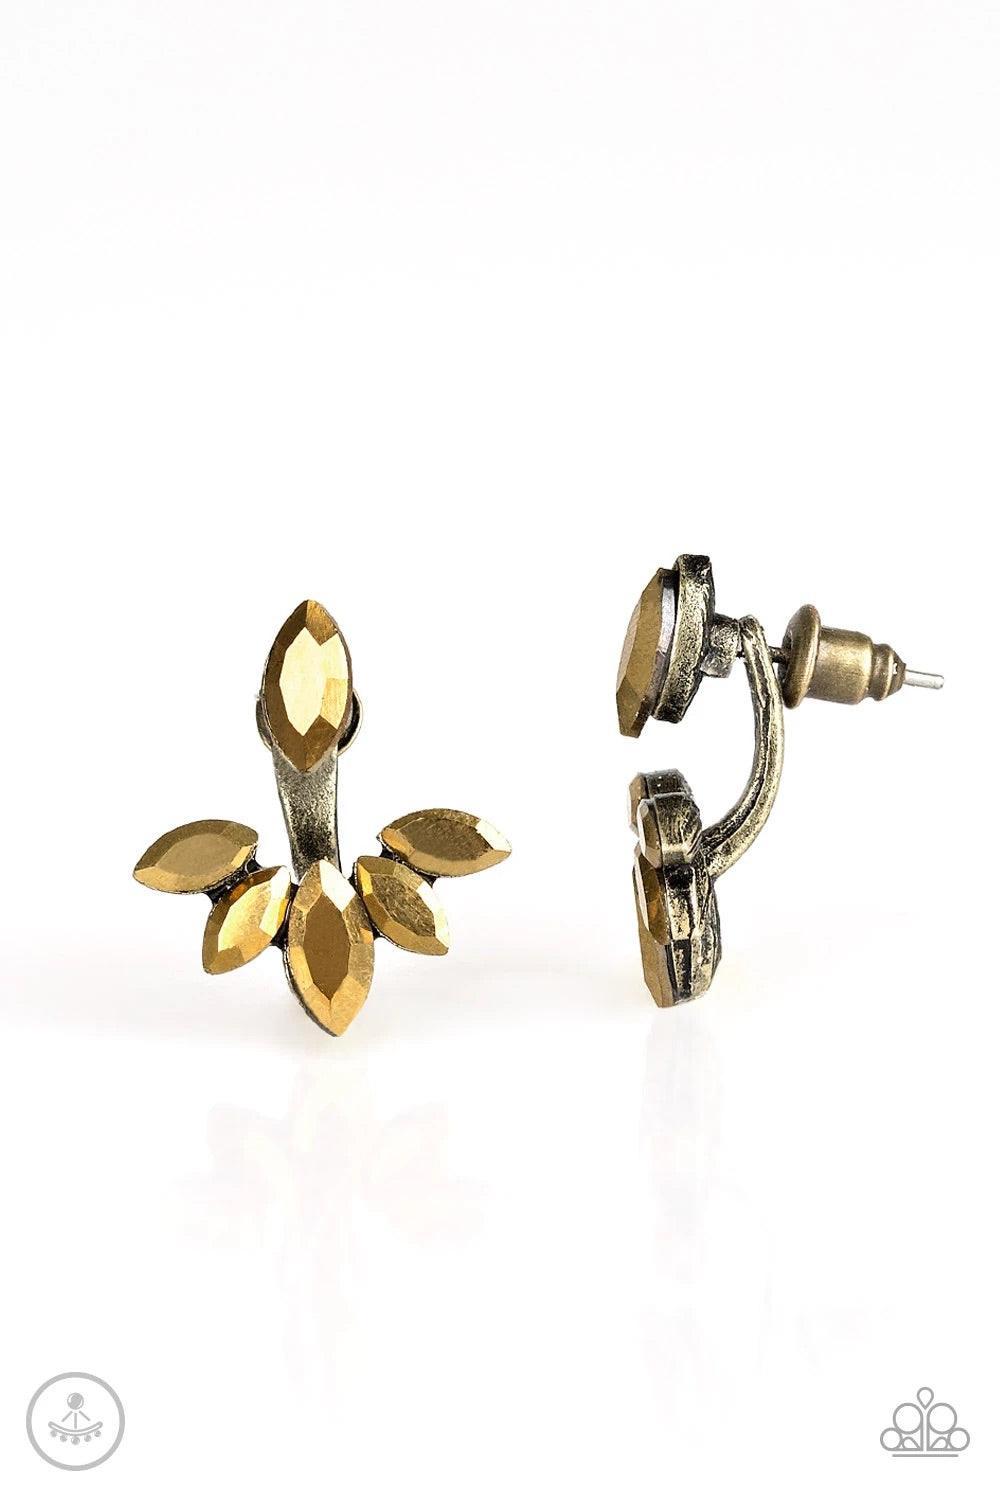 Paparazzi Accessories Radical Refinement - Brass A solitaire aurum marquise cut rhinestone attaches to a double-sided post, designed to fasten behind the ear. Encrusted in matching aurum rhinestones, a double-sided post peeks out beneath the ear, creating